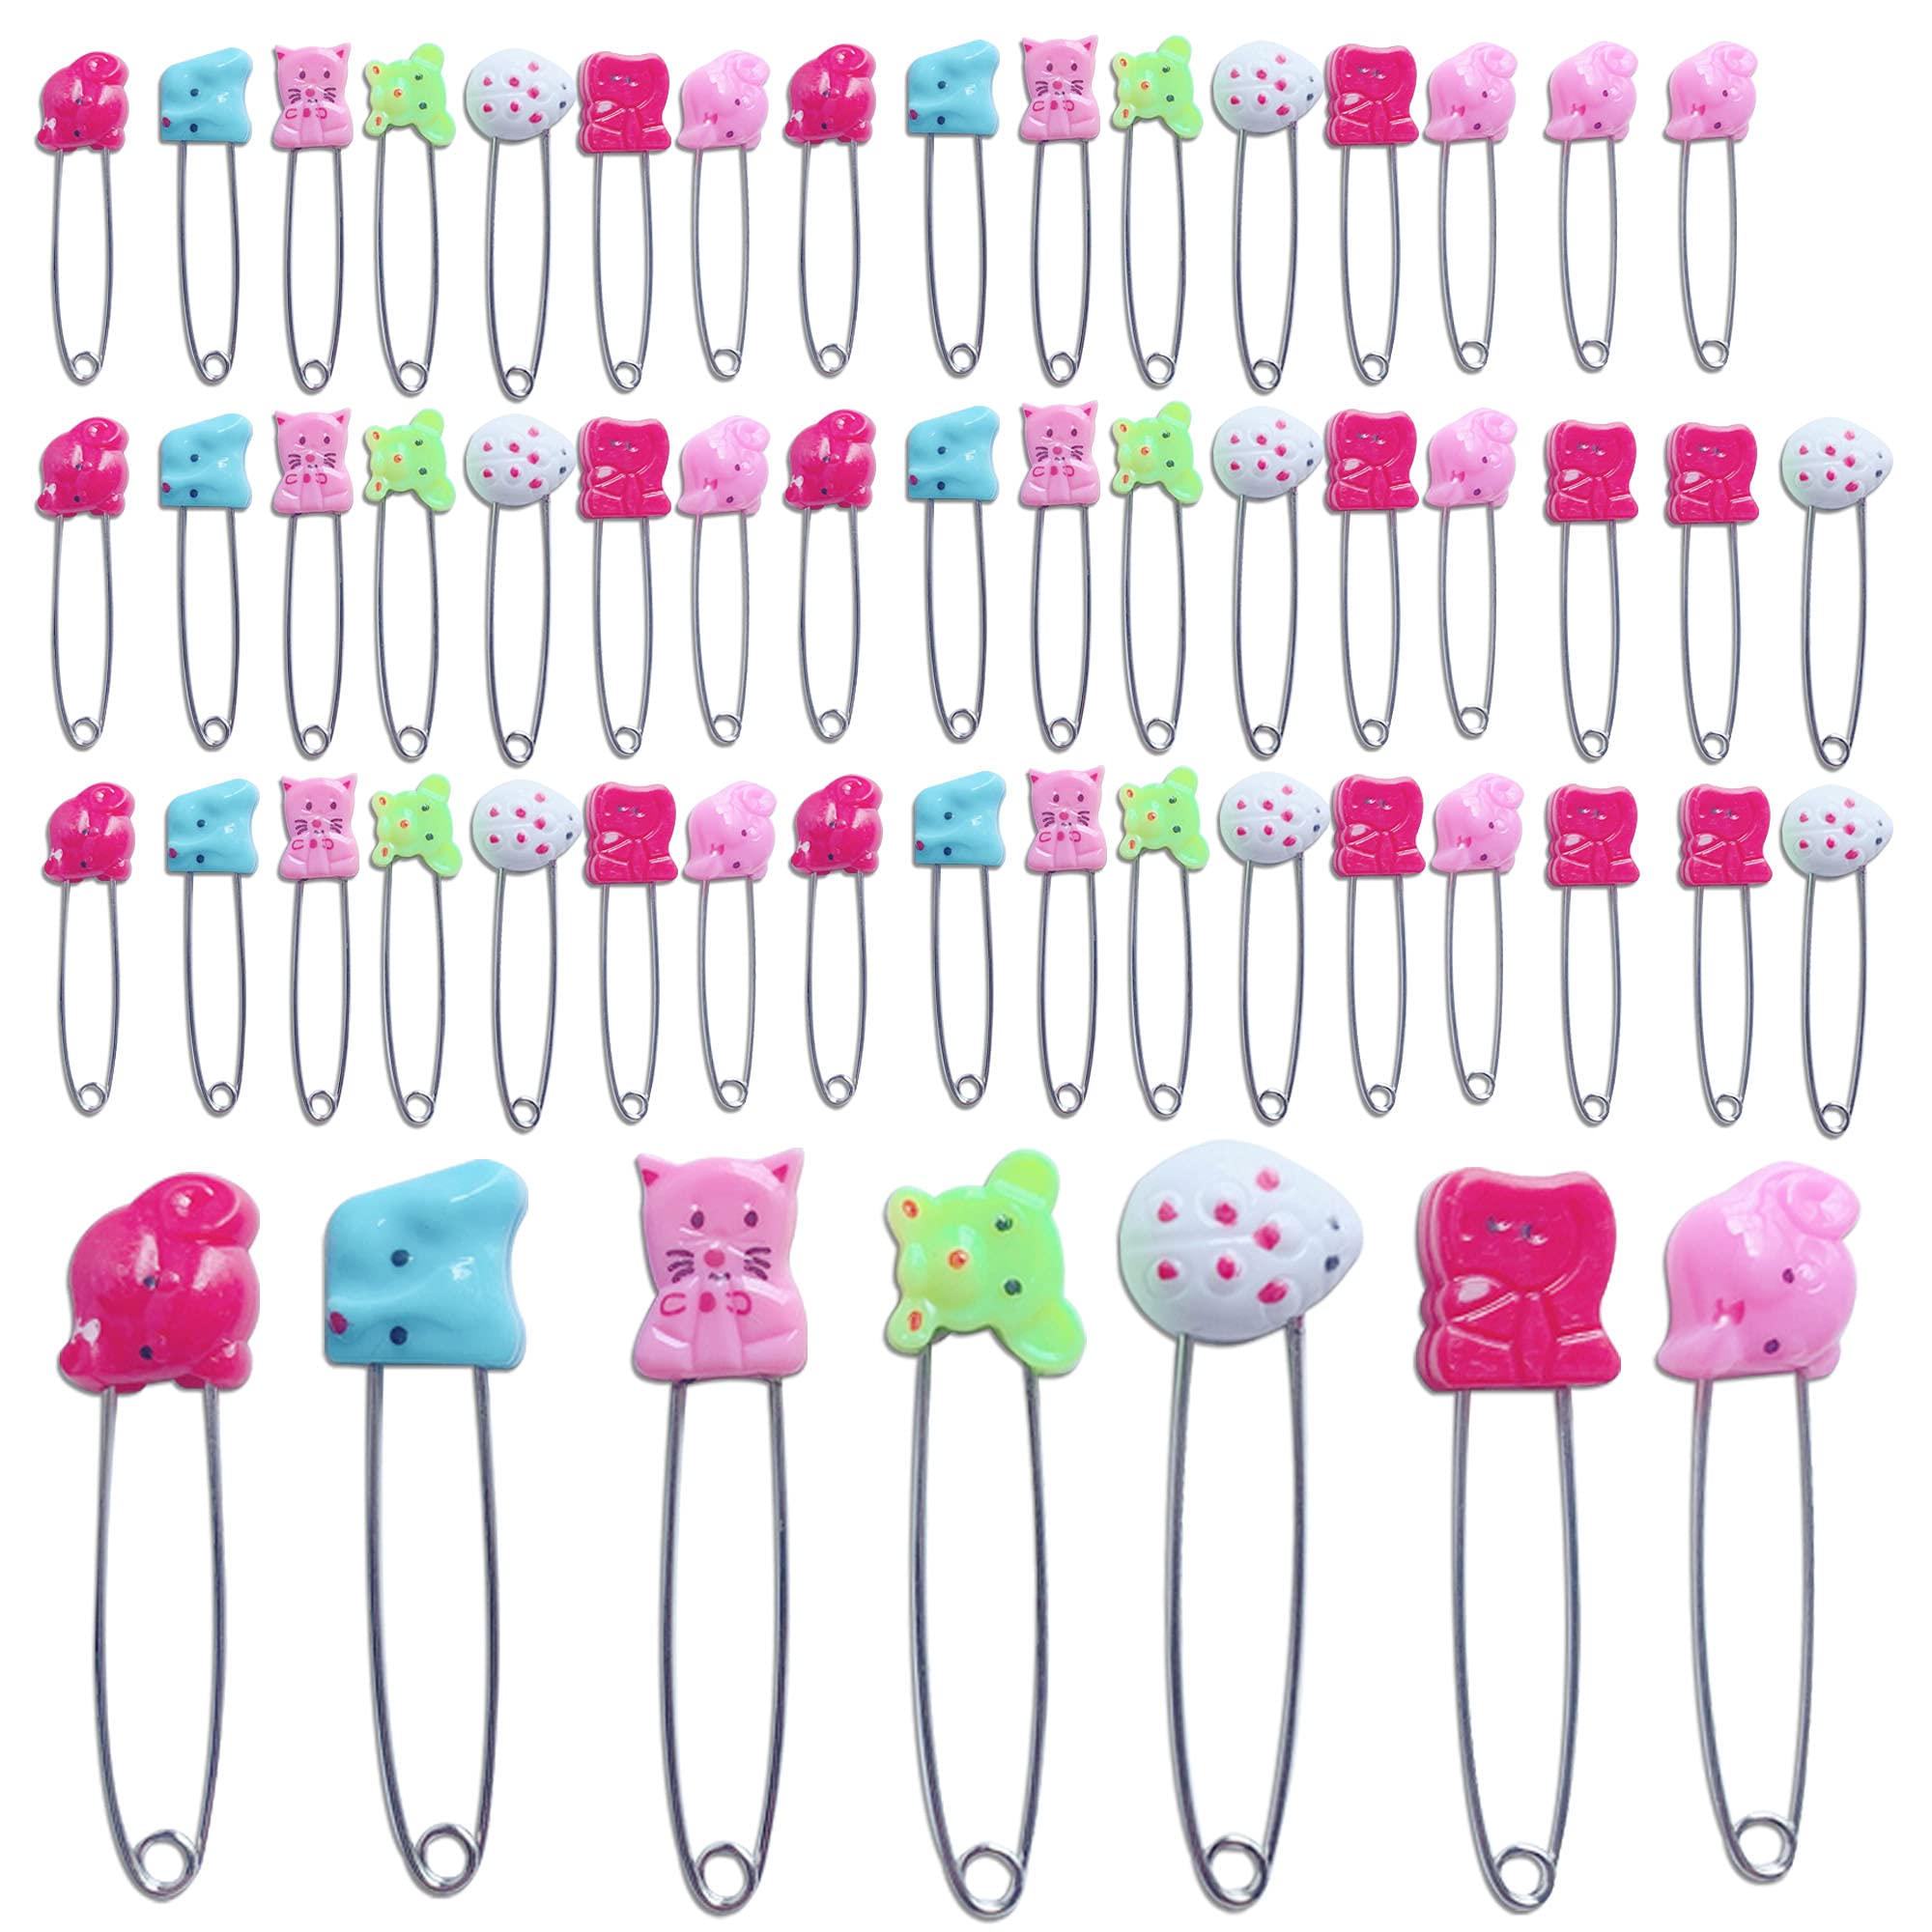 36pcs Baby Safety Pin Safety Brooches Clothes Pin for Baby Shower Diaper Pin